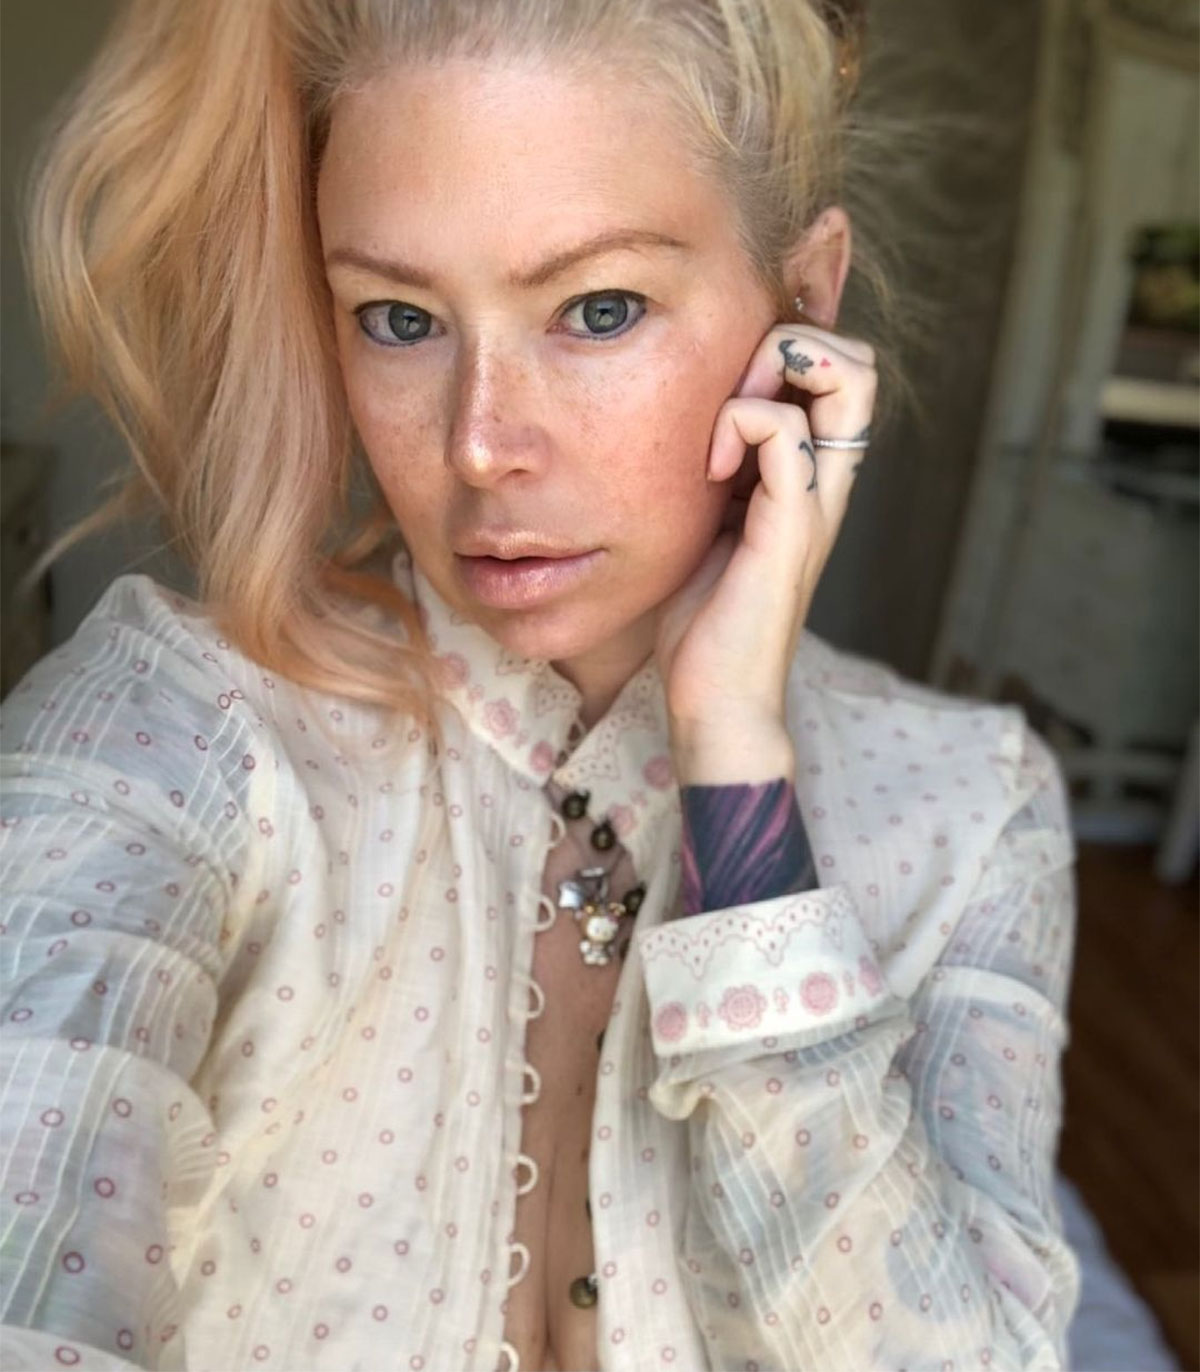 Www Twpronstar Com - Jenna Jameson Has Guillain-Barre Syndrome After Being Unable to Walk